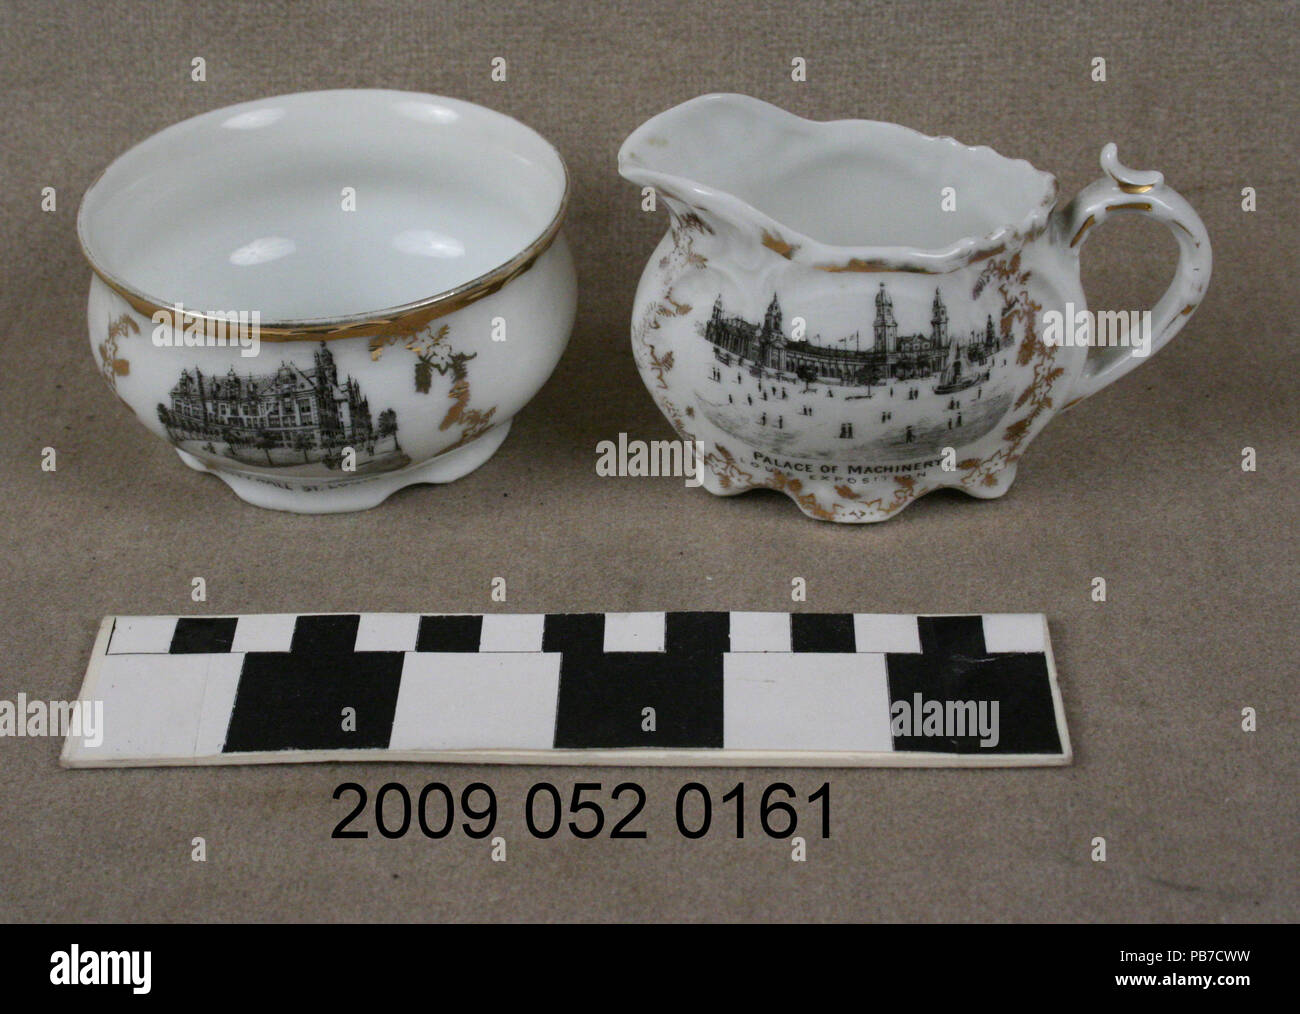 1850 White Ceramic Creamer and Sugar Set With Black Transfer Images of City Hall and Palace of Machinery Stock Photo